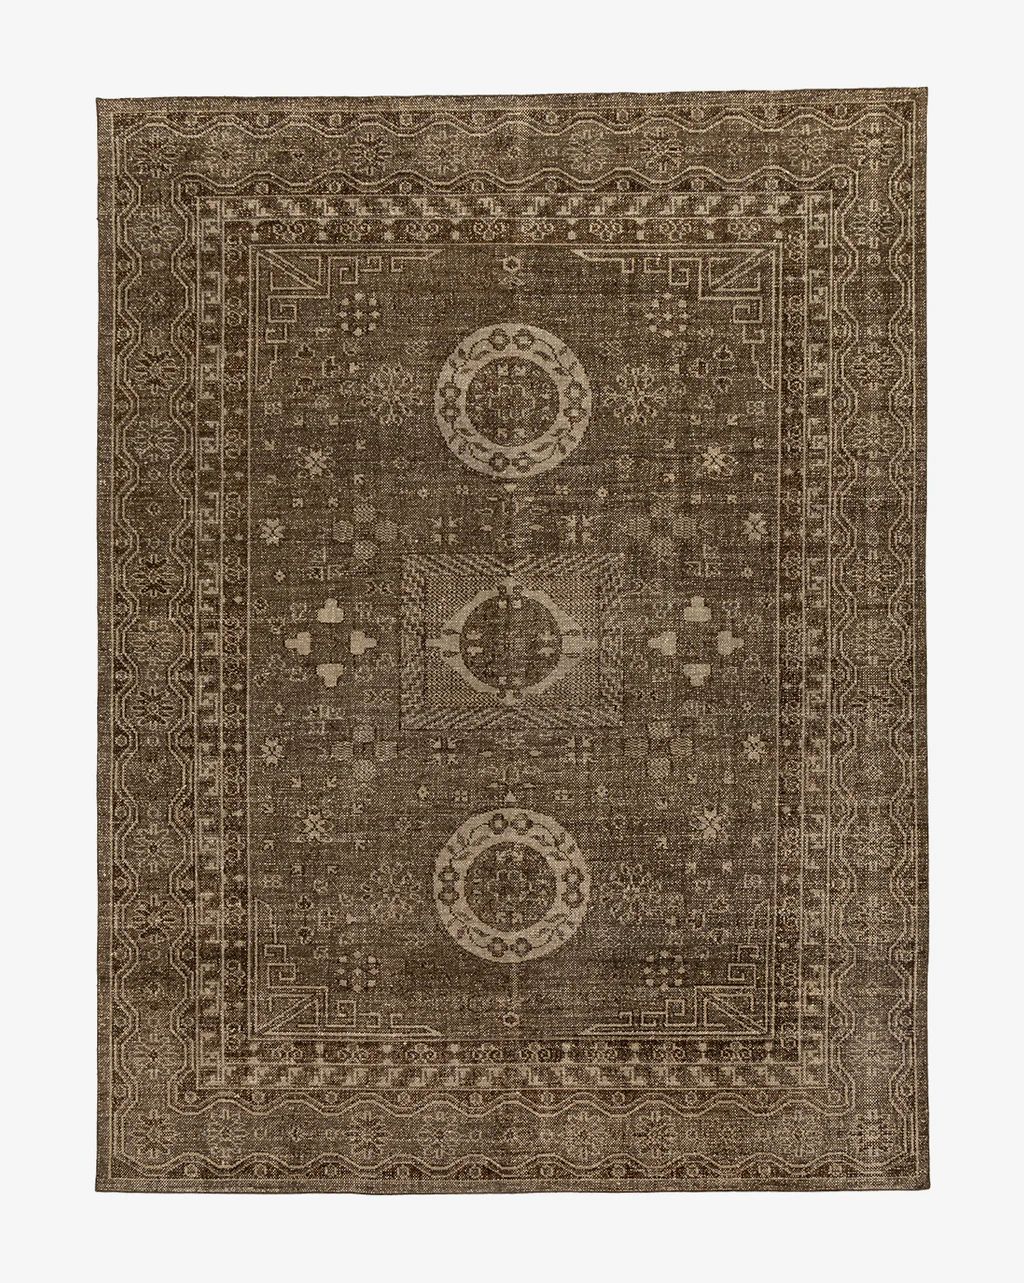 La Morra Hand-Knotted Wool Rug | McGee & Co.